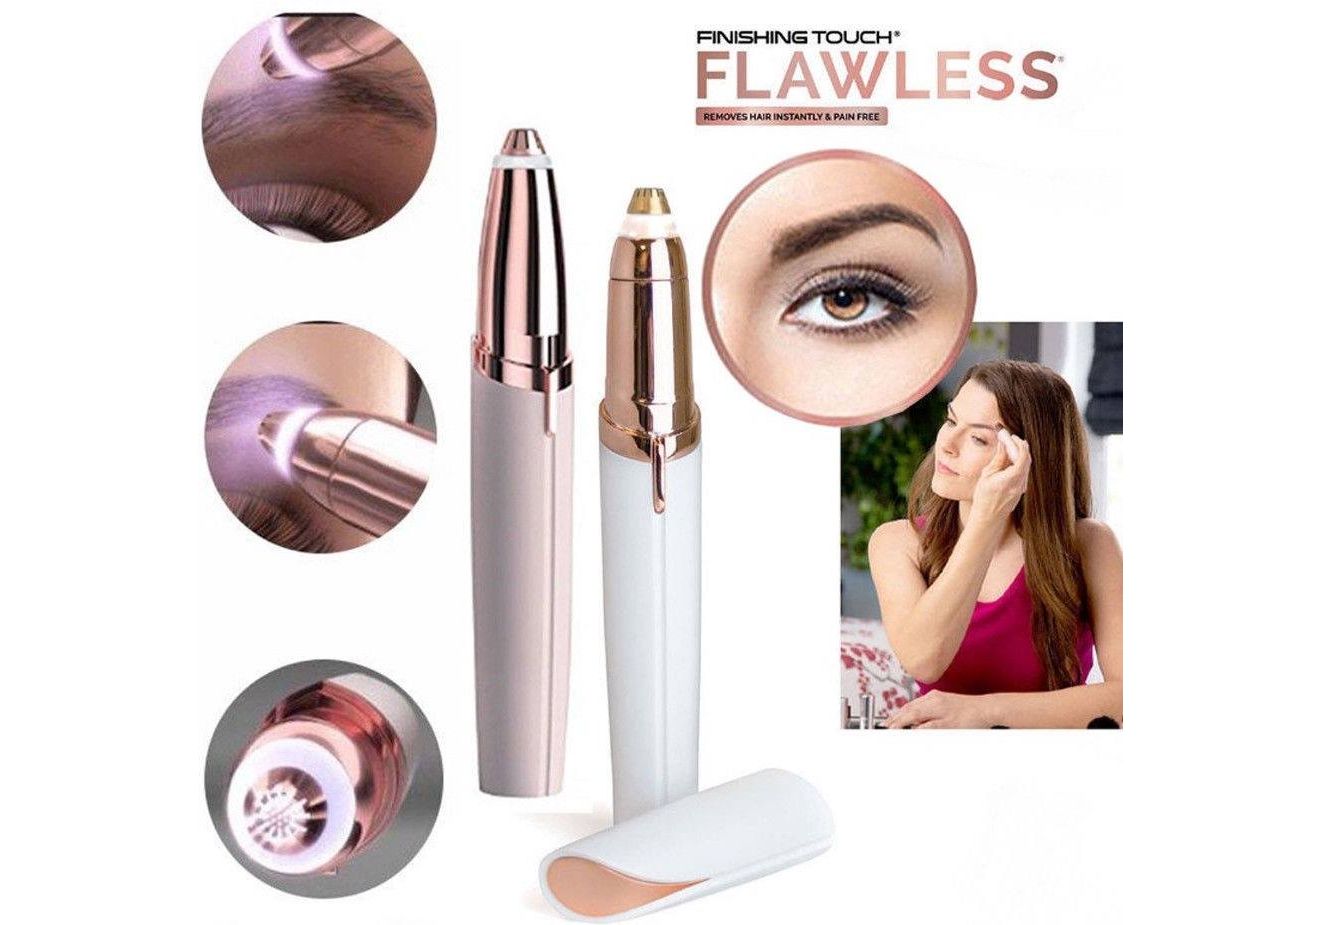 Flawless Finishing Touch Eyebrow Hair Remover (Rechargeable)